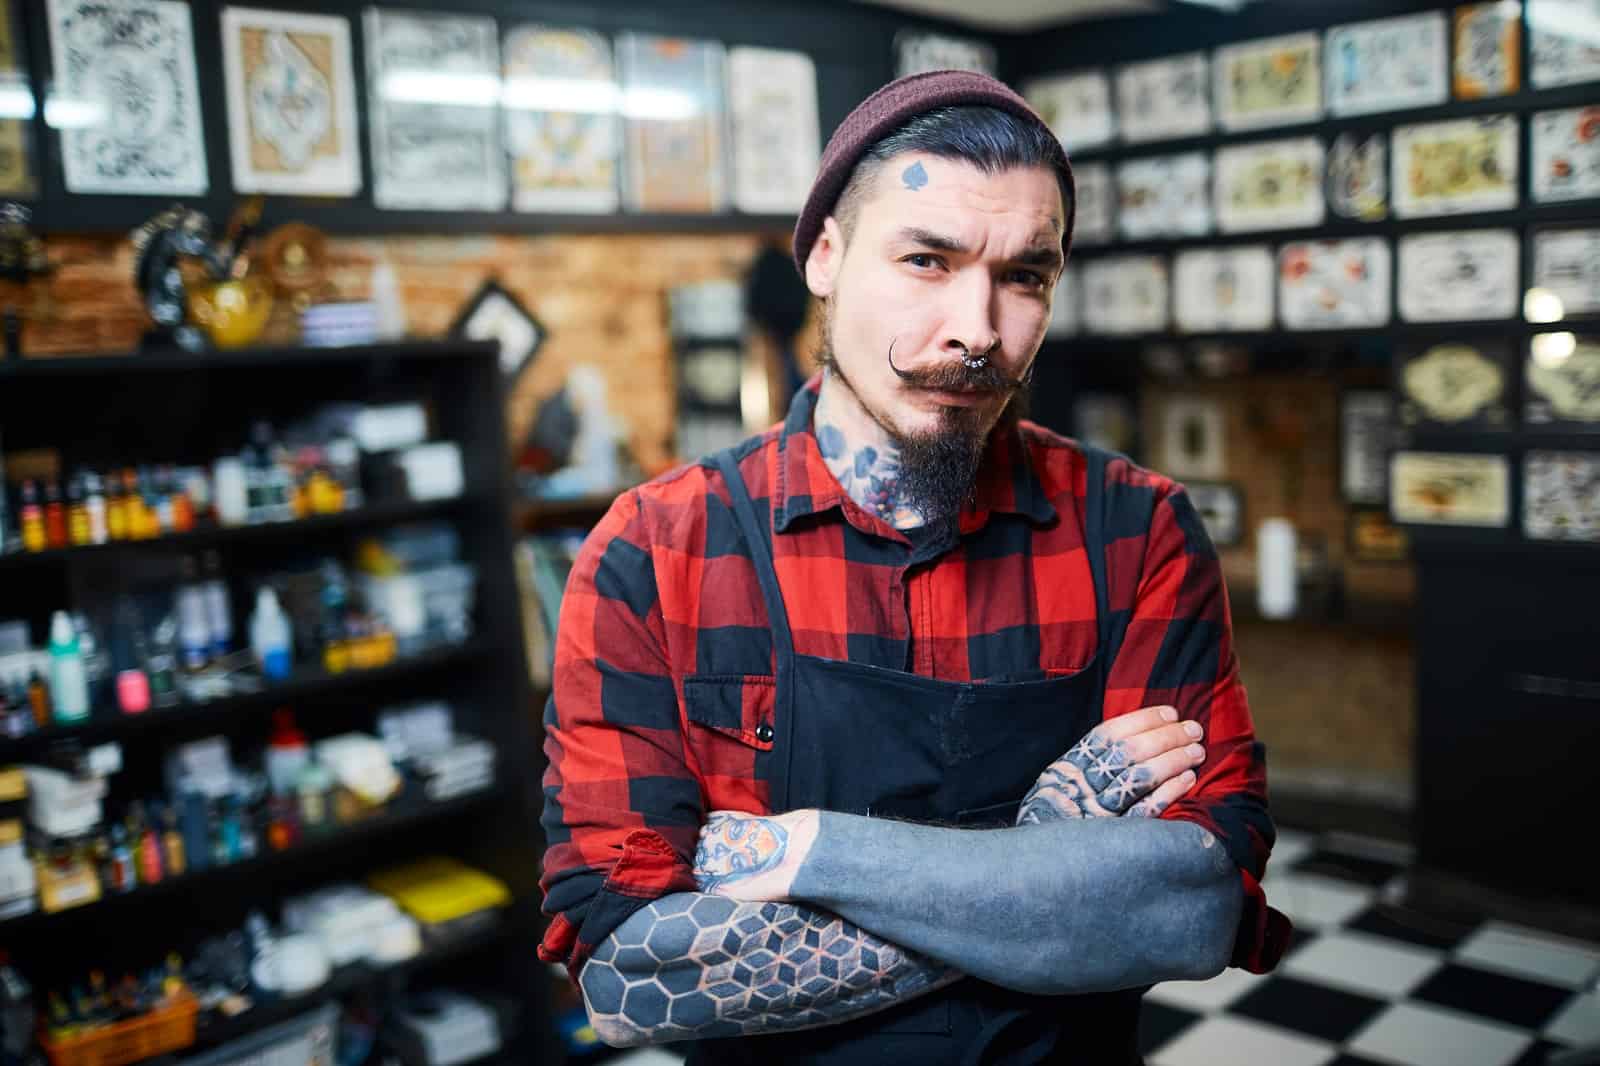 How To Become A Tattoo Artist